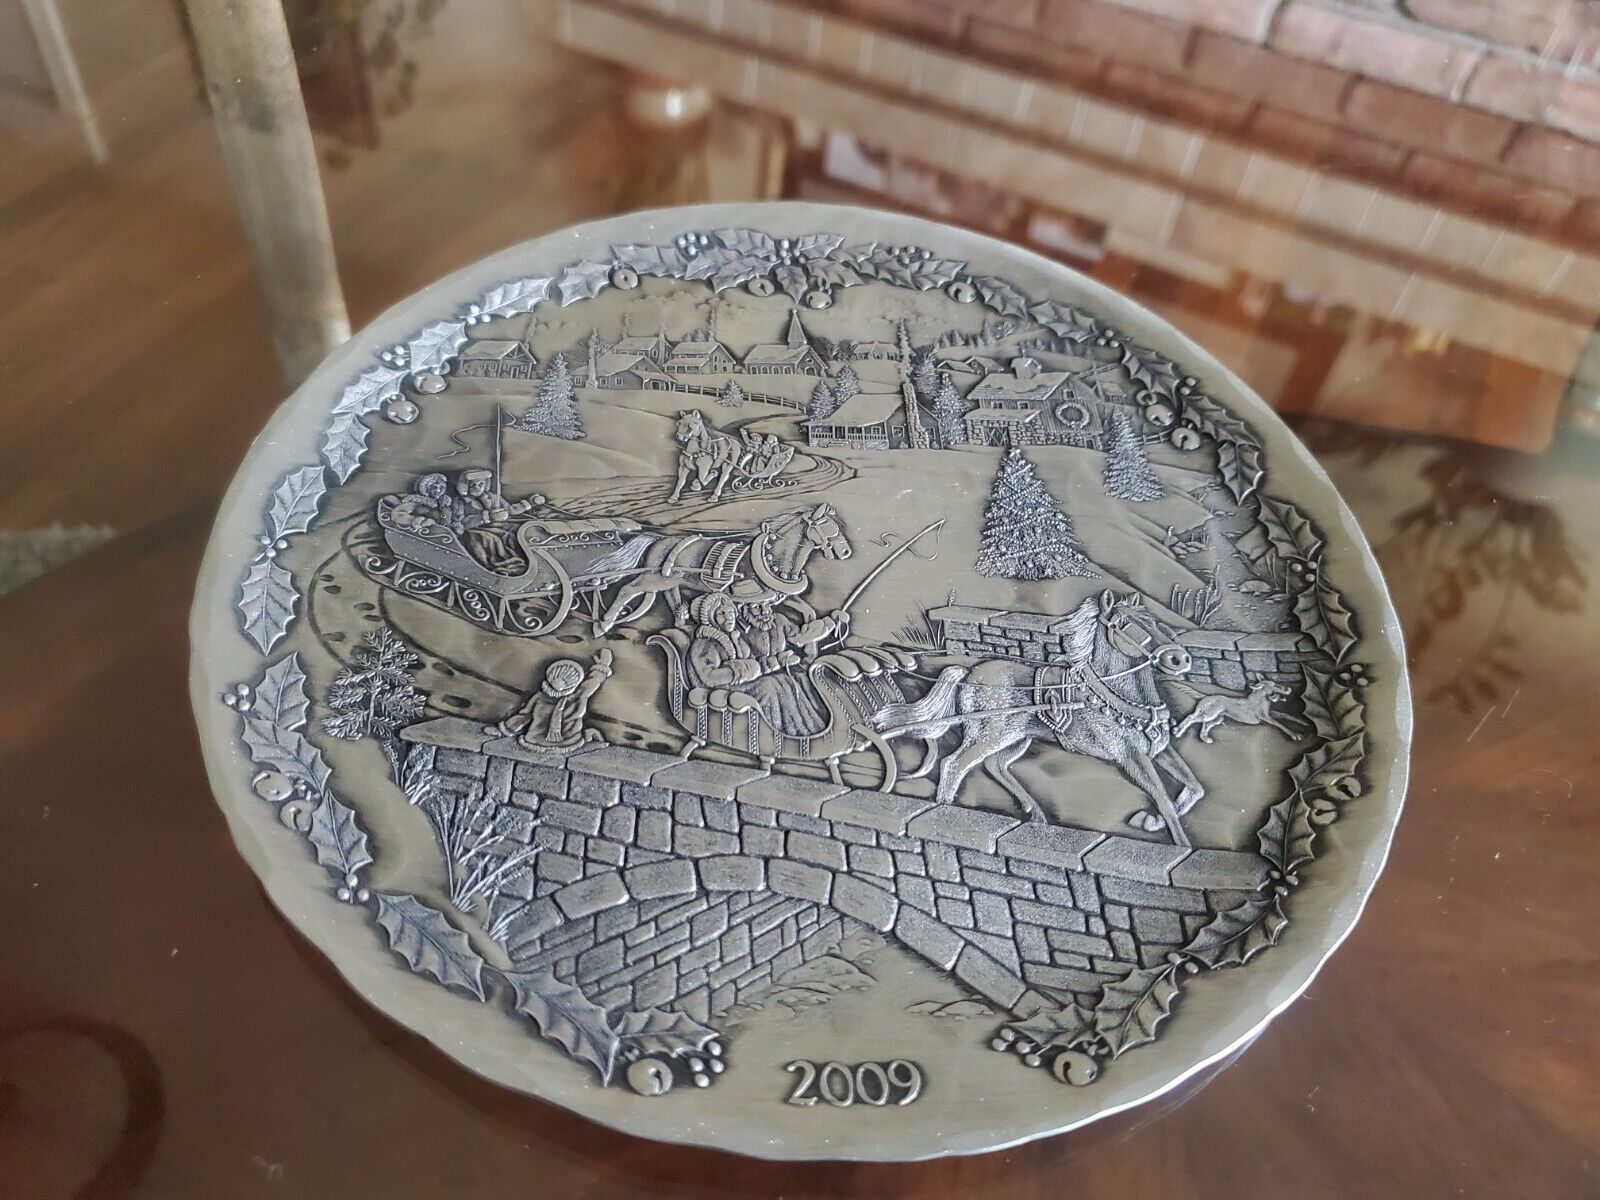 Vintage Wendell August Forge 2009 Sleigh Race Pewter Decorative Plate